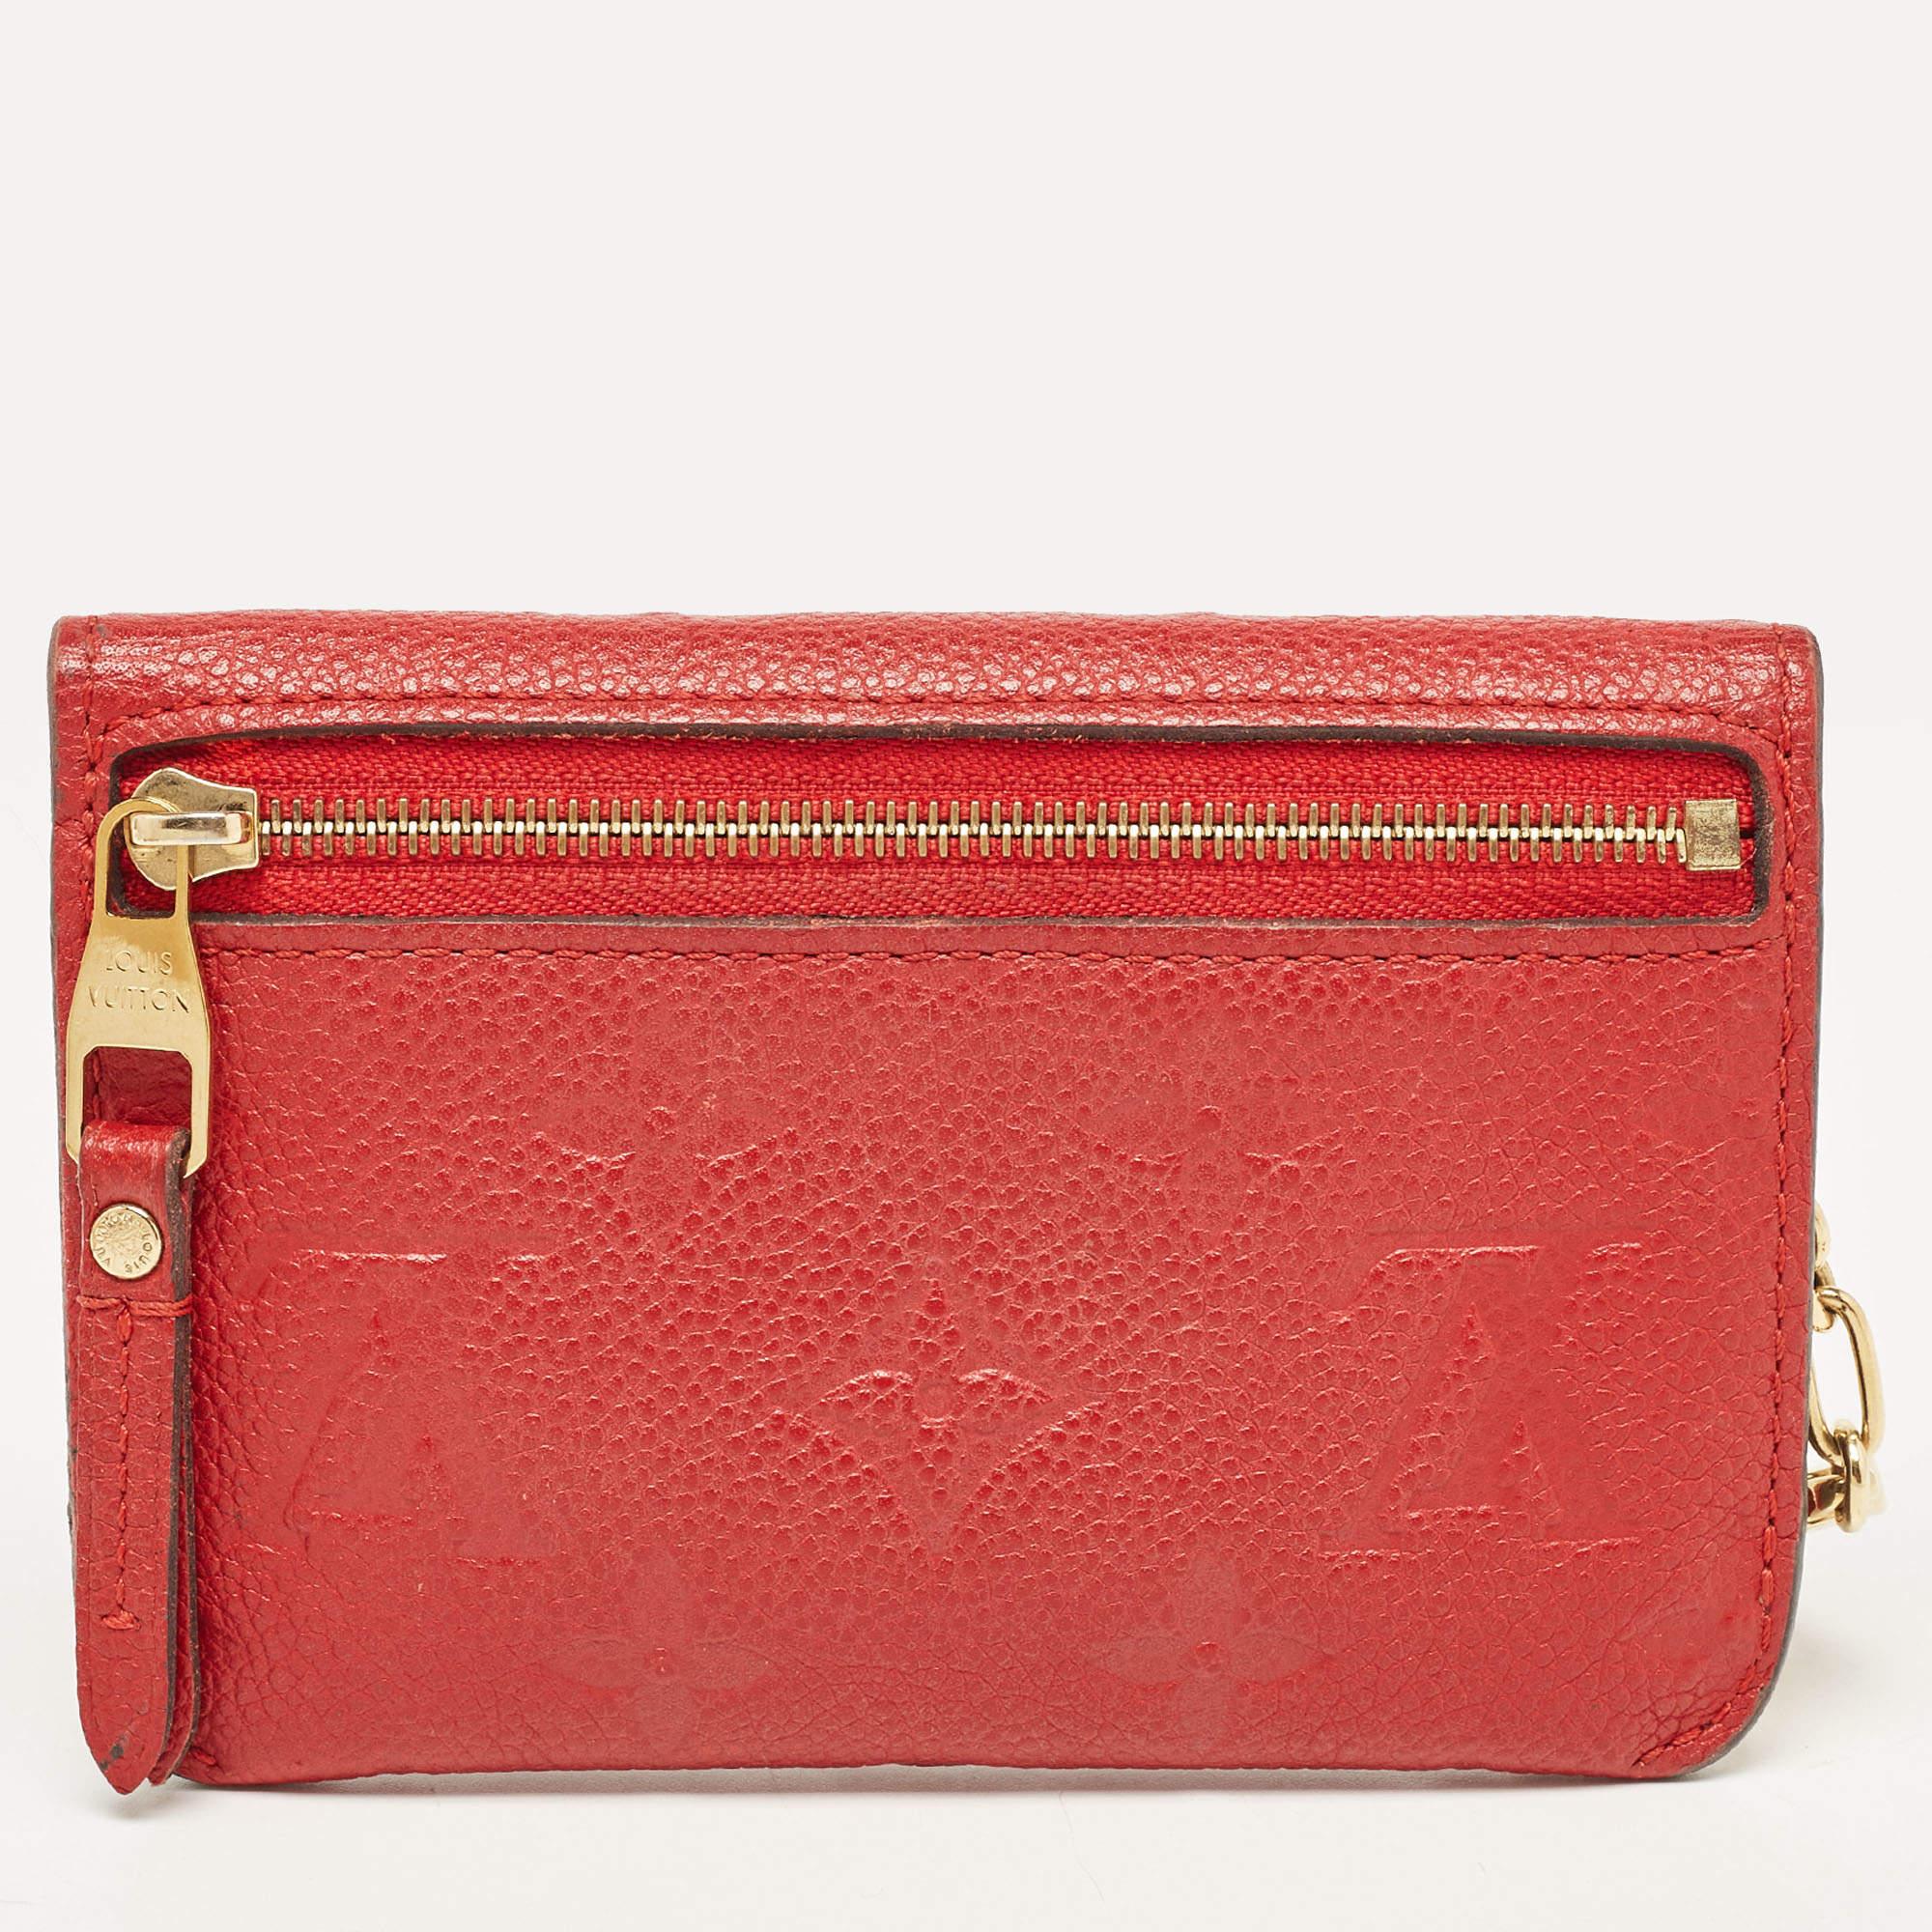 This classic key pouch by Louis Vuitton is your perfect choice when it comes to looks and utility. It doesn't fall short with a perfectly crafted Cherry Empreinte leather. It has a well-spaced interior where you can keep all your keys. It's a